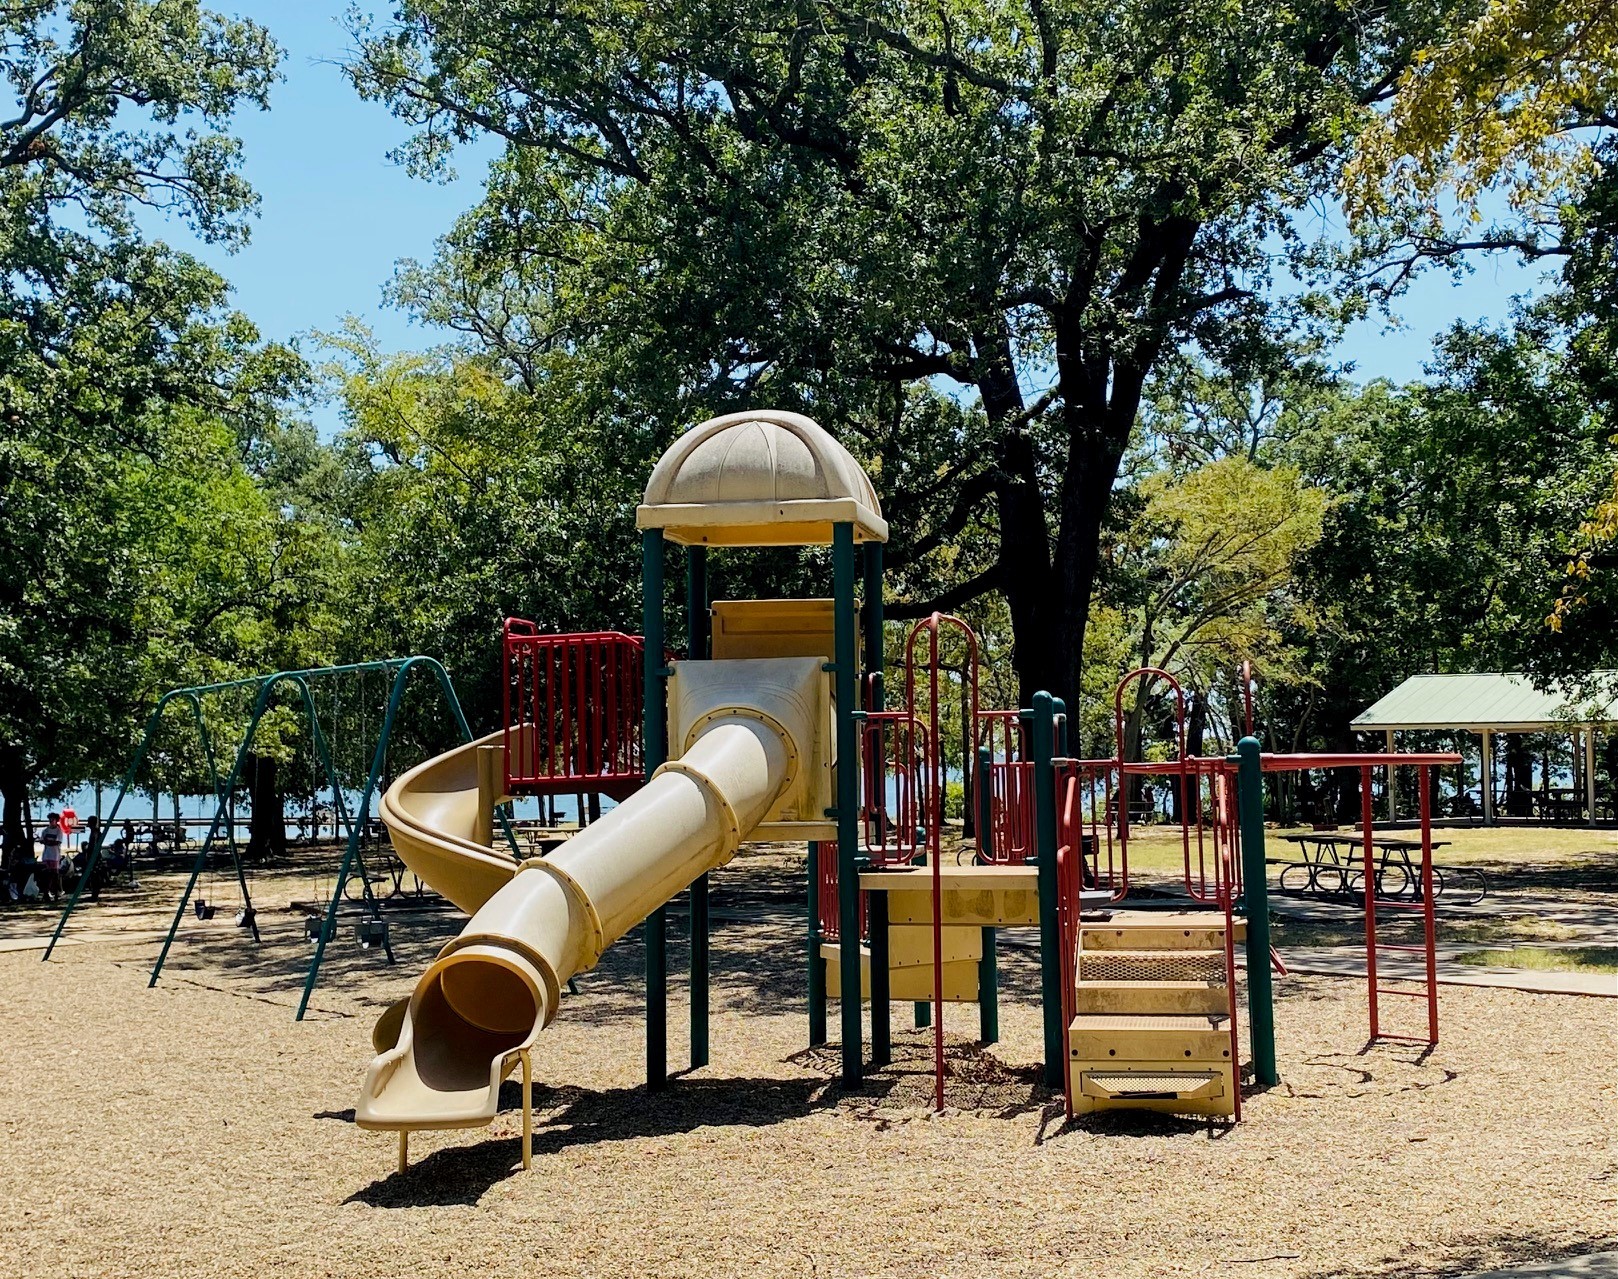 Cooper Lake State Park Campaigns to revamp playground areas in 2023